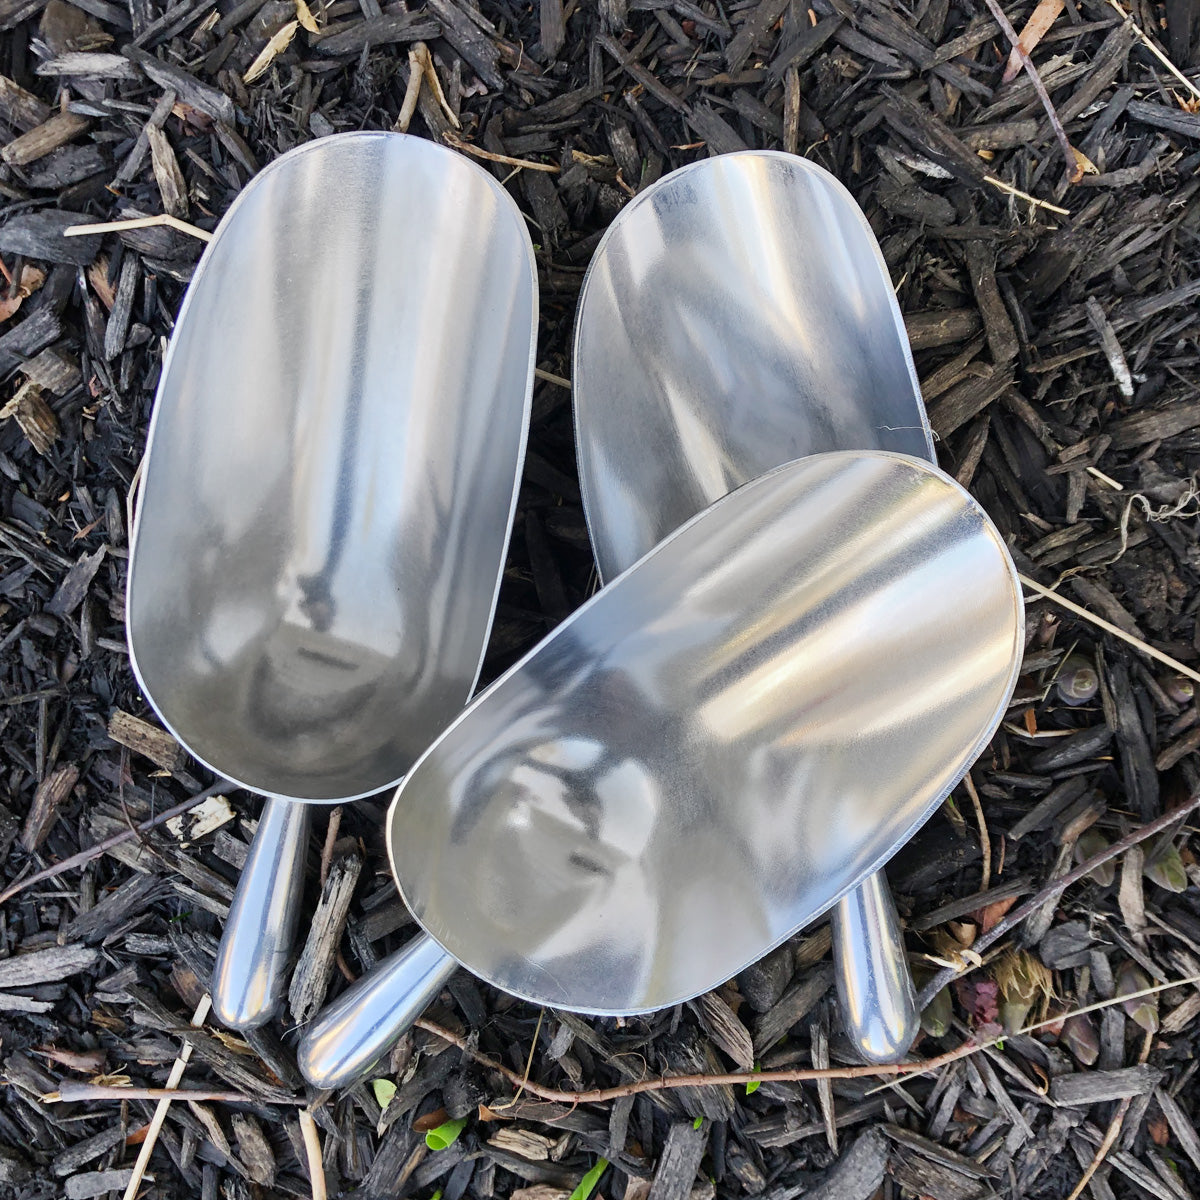 Hardware Store Style Garden Scoops - Set of 3